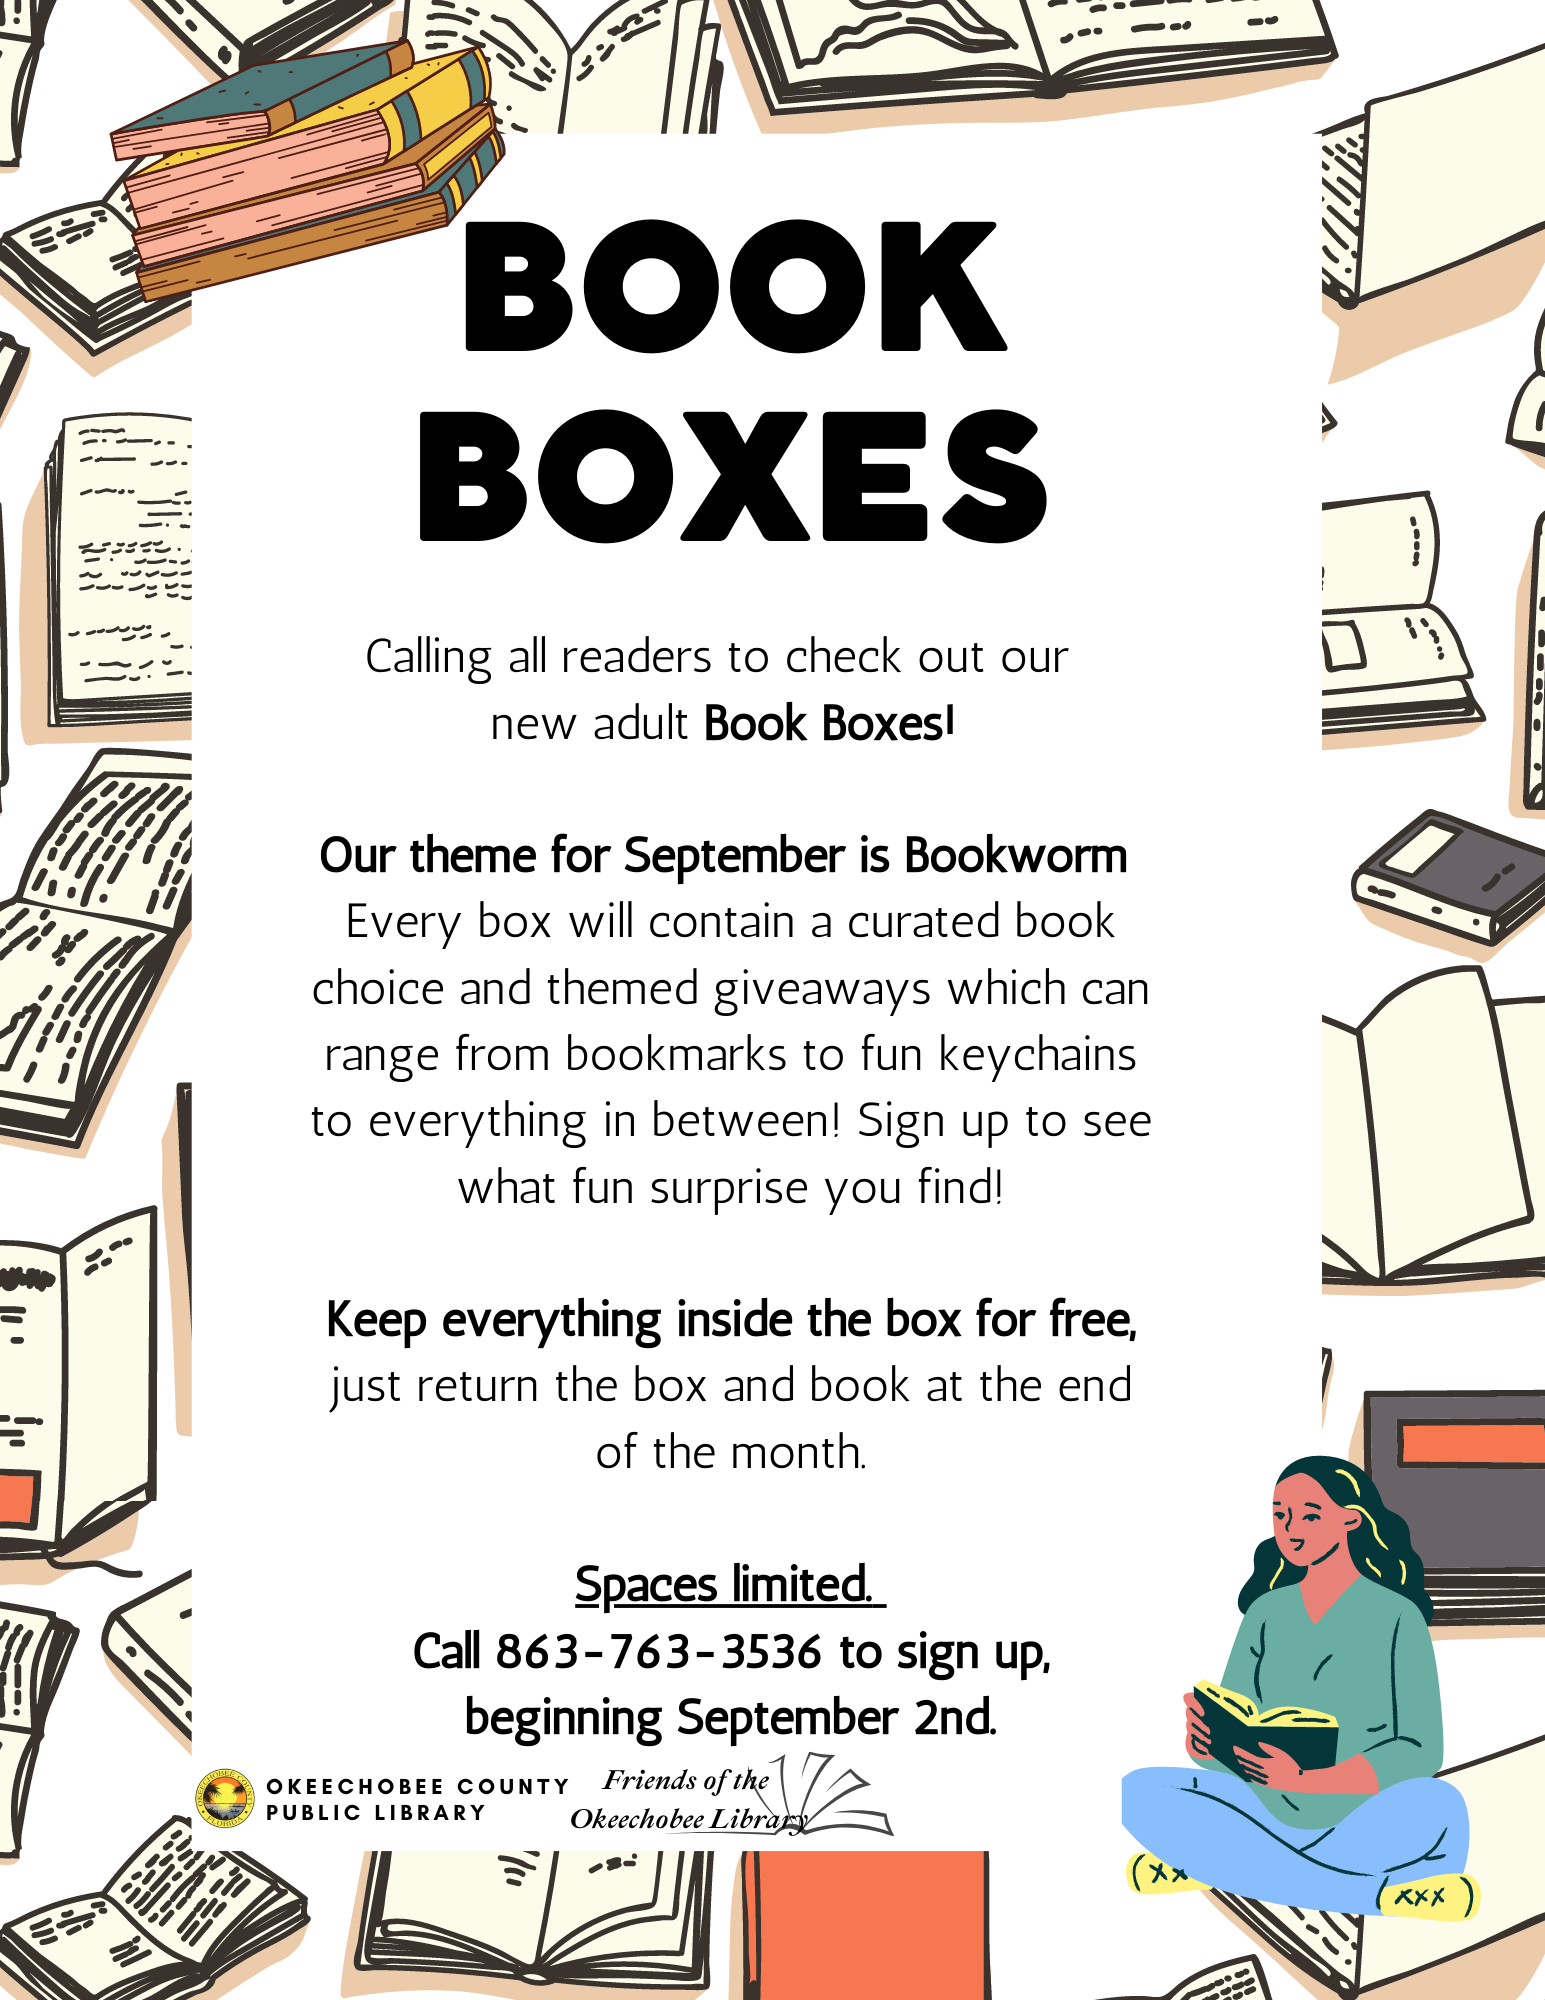 September Book Boxes! Every box will contain a curated book choice and themed giveaways which can range from bookmarks to fun keychains to everything in between! Sign up to see what fun surprise you find!